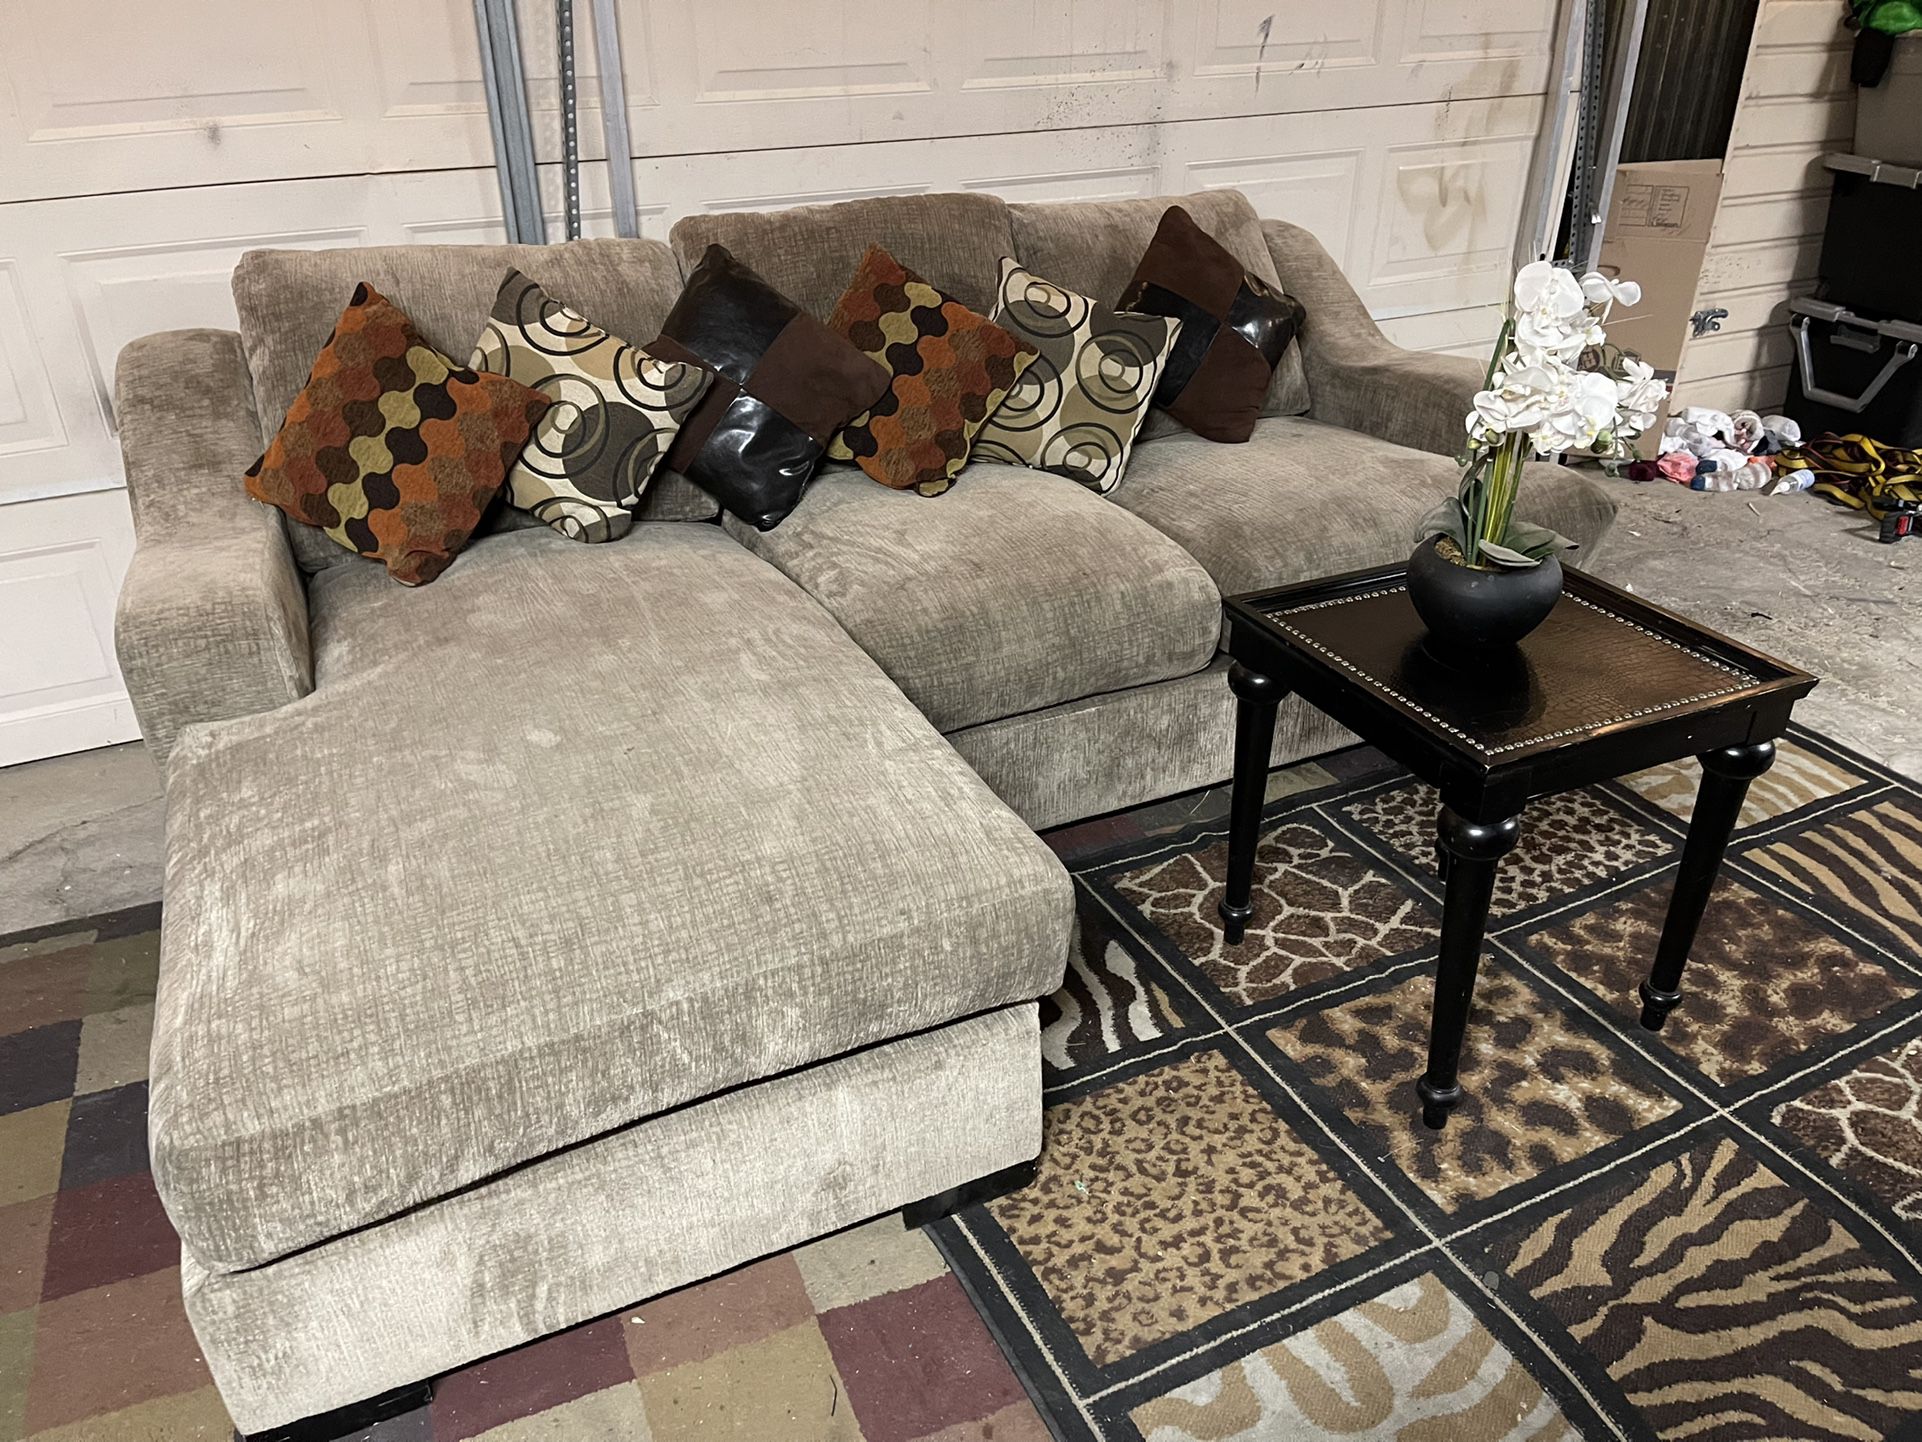 BEAUTIFUL SECTIONAL COUCH WITH TABLE…FREE DELIVERY AVAILABLE🚛🚛🚛